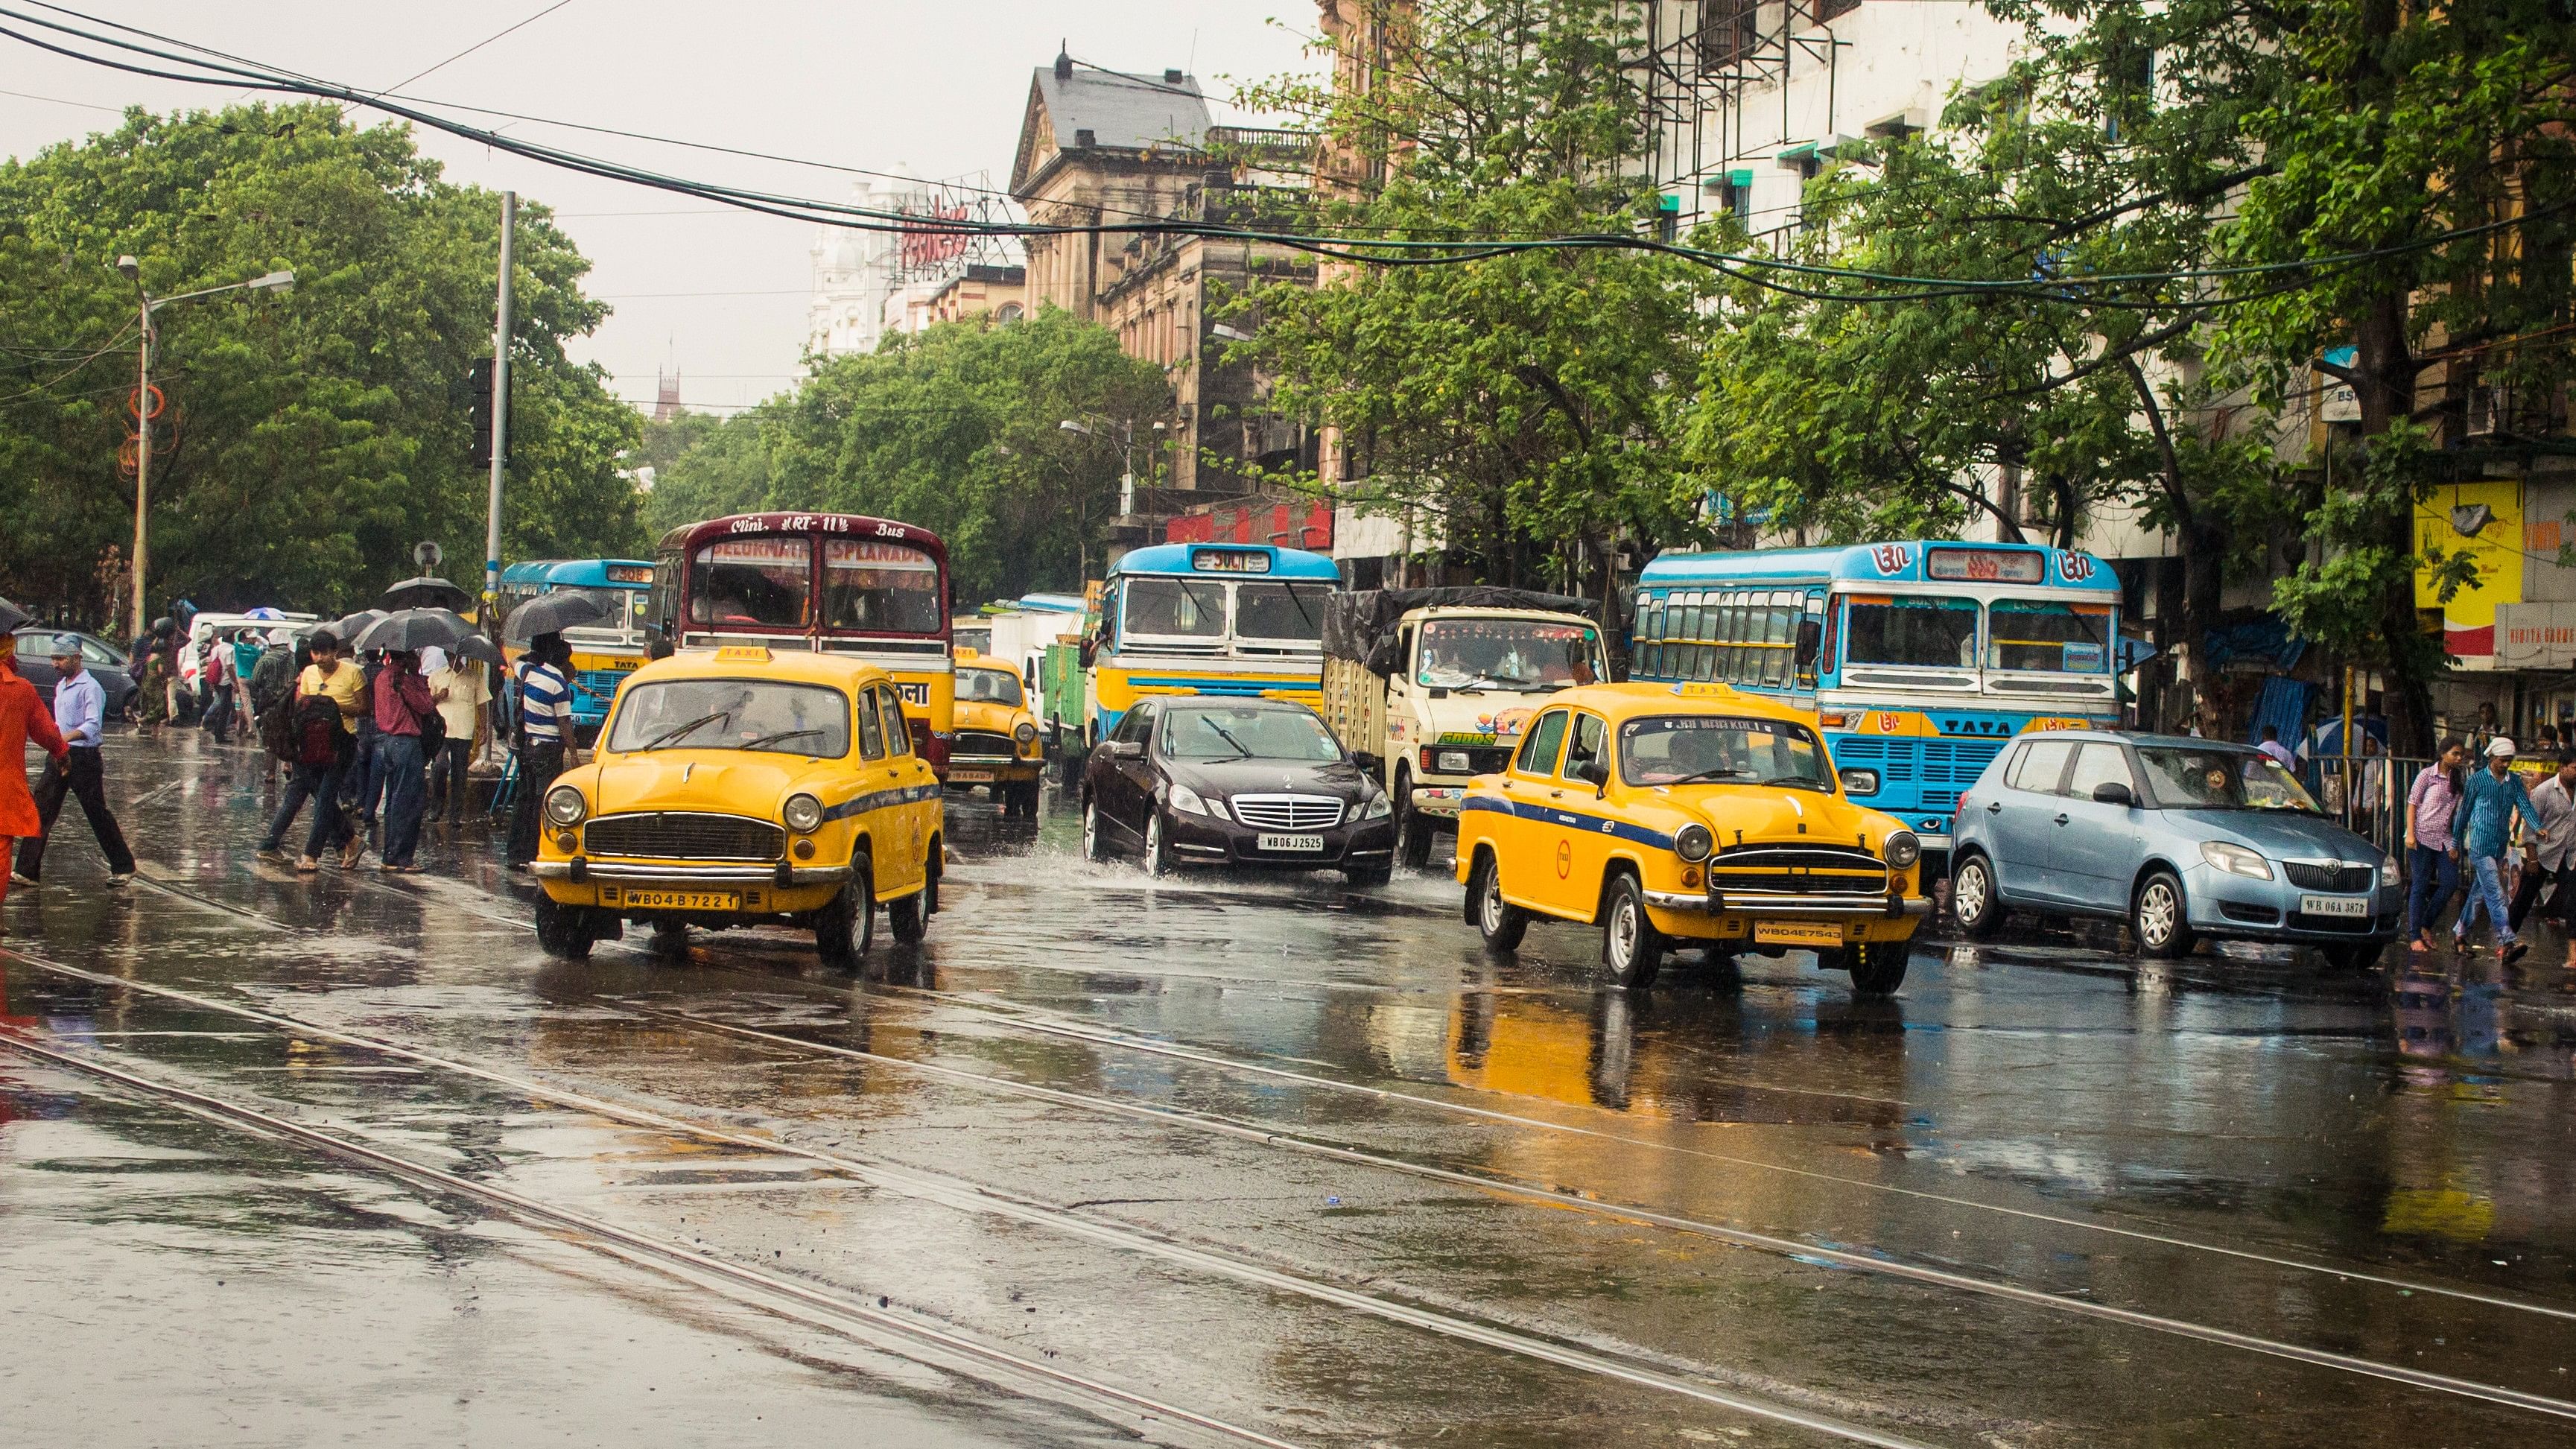 <div class="paragraphs"><p>A Mercedes can be seen among taxis and buses in Kolkata, West Bengal.</p></div>